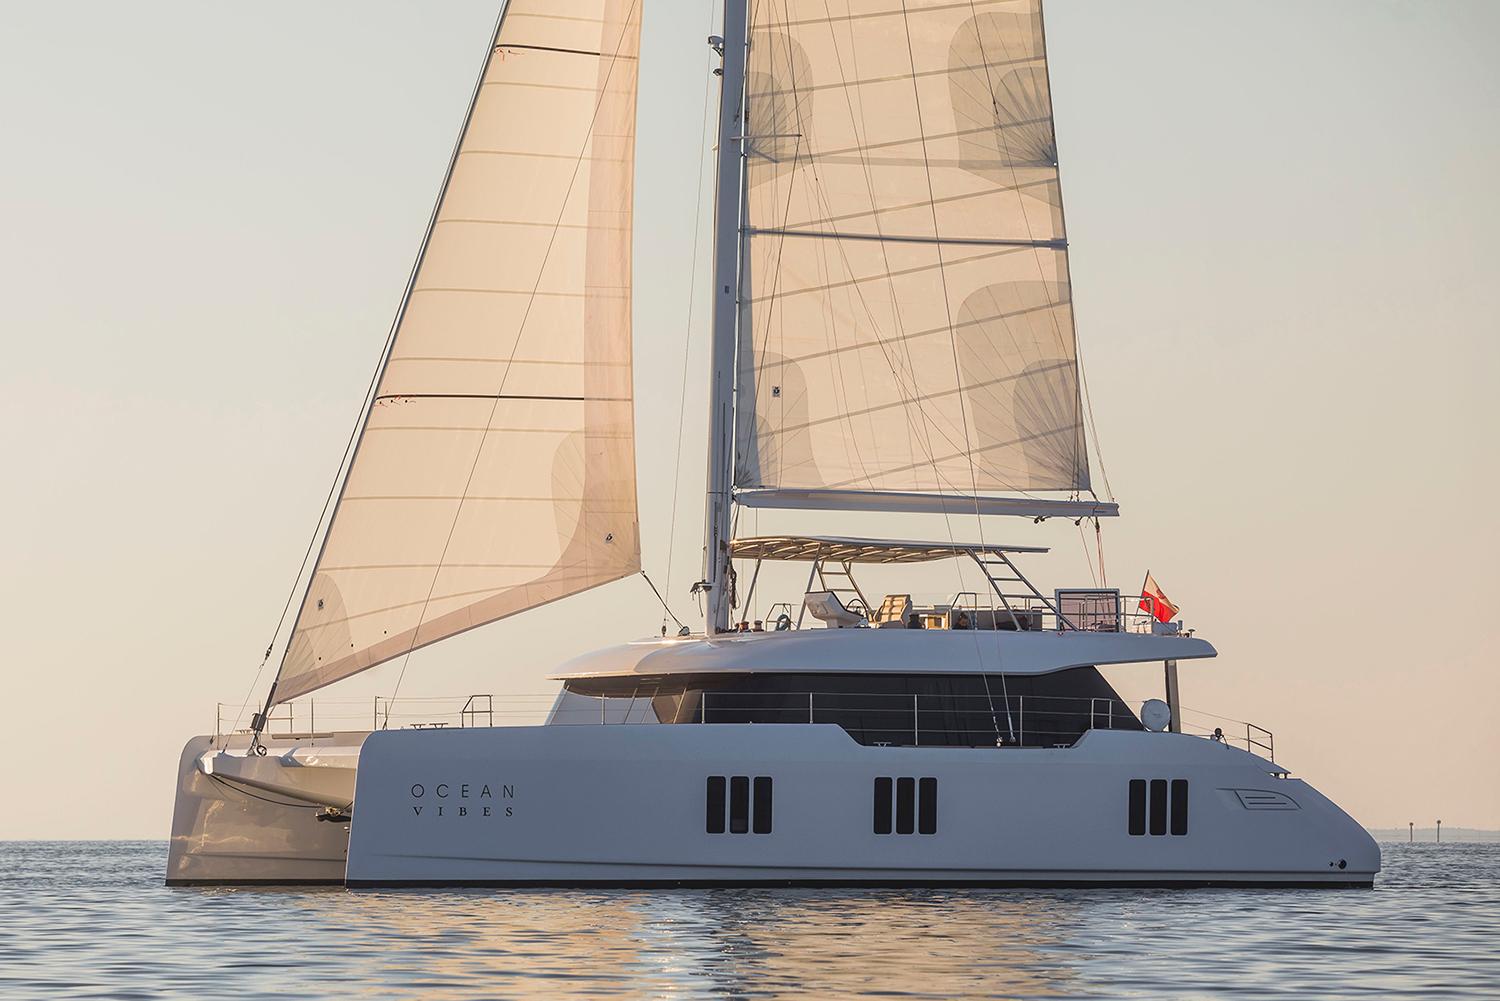 Ocean Vibes Yacht Photos Pics Manufacturer Provided Image